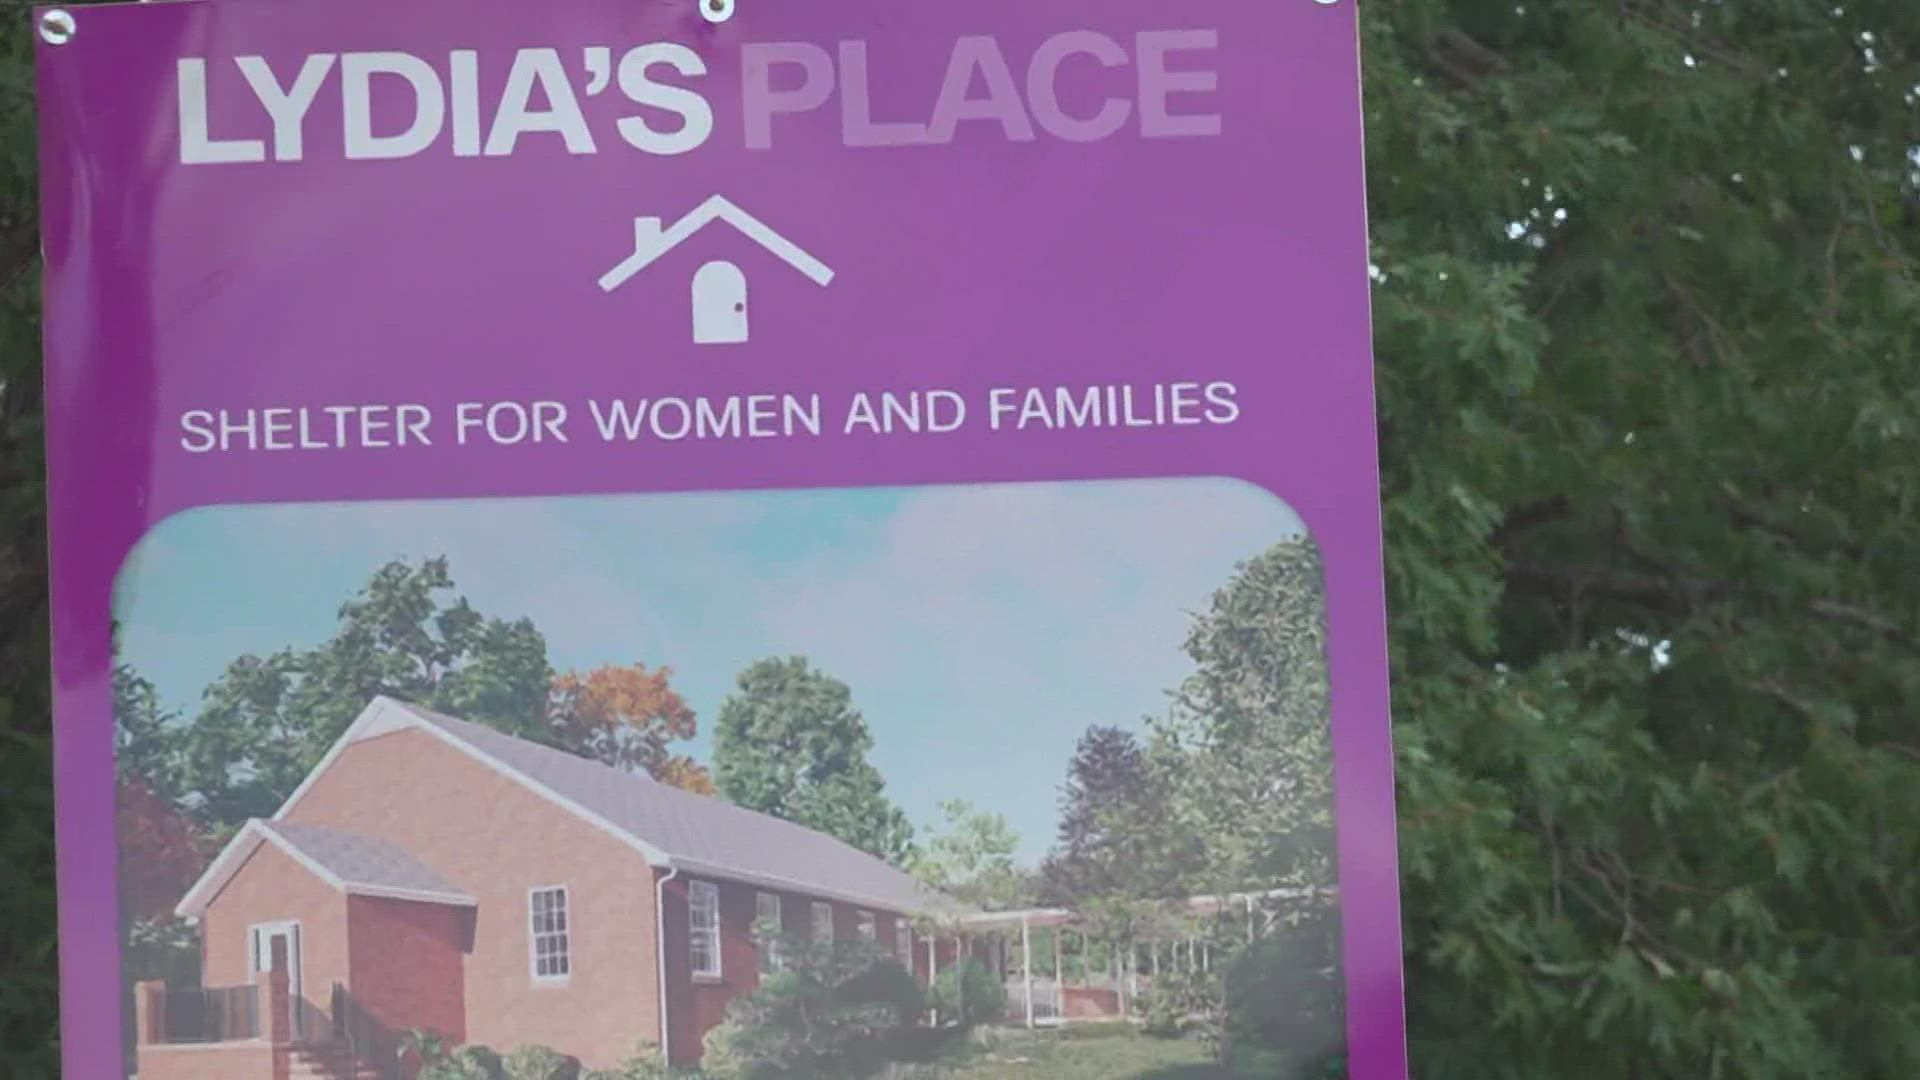 "Lydia's Place" is a nonprofit organization providing temporary shelter for women and families experiencing homelessness.